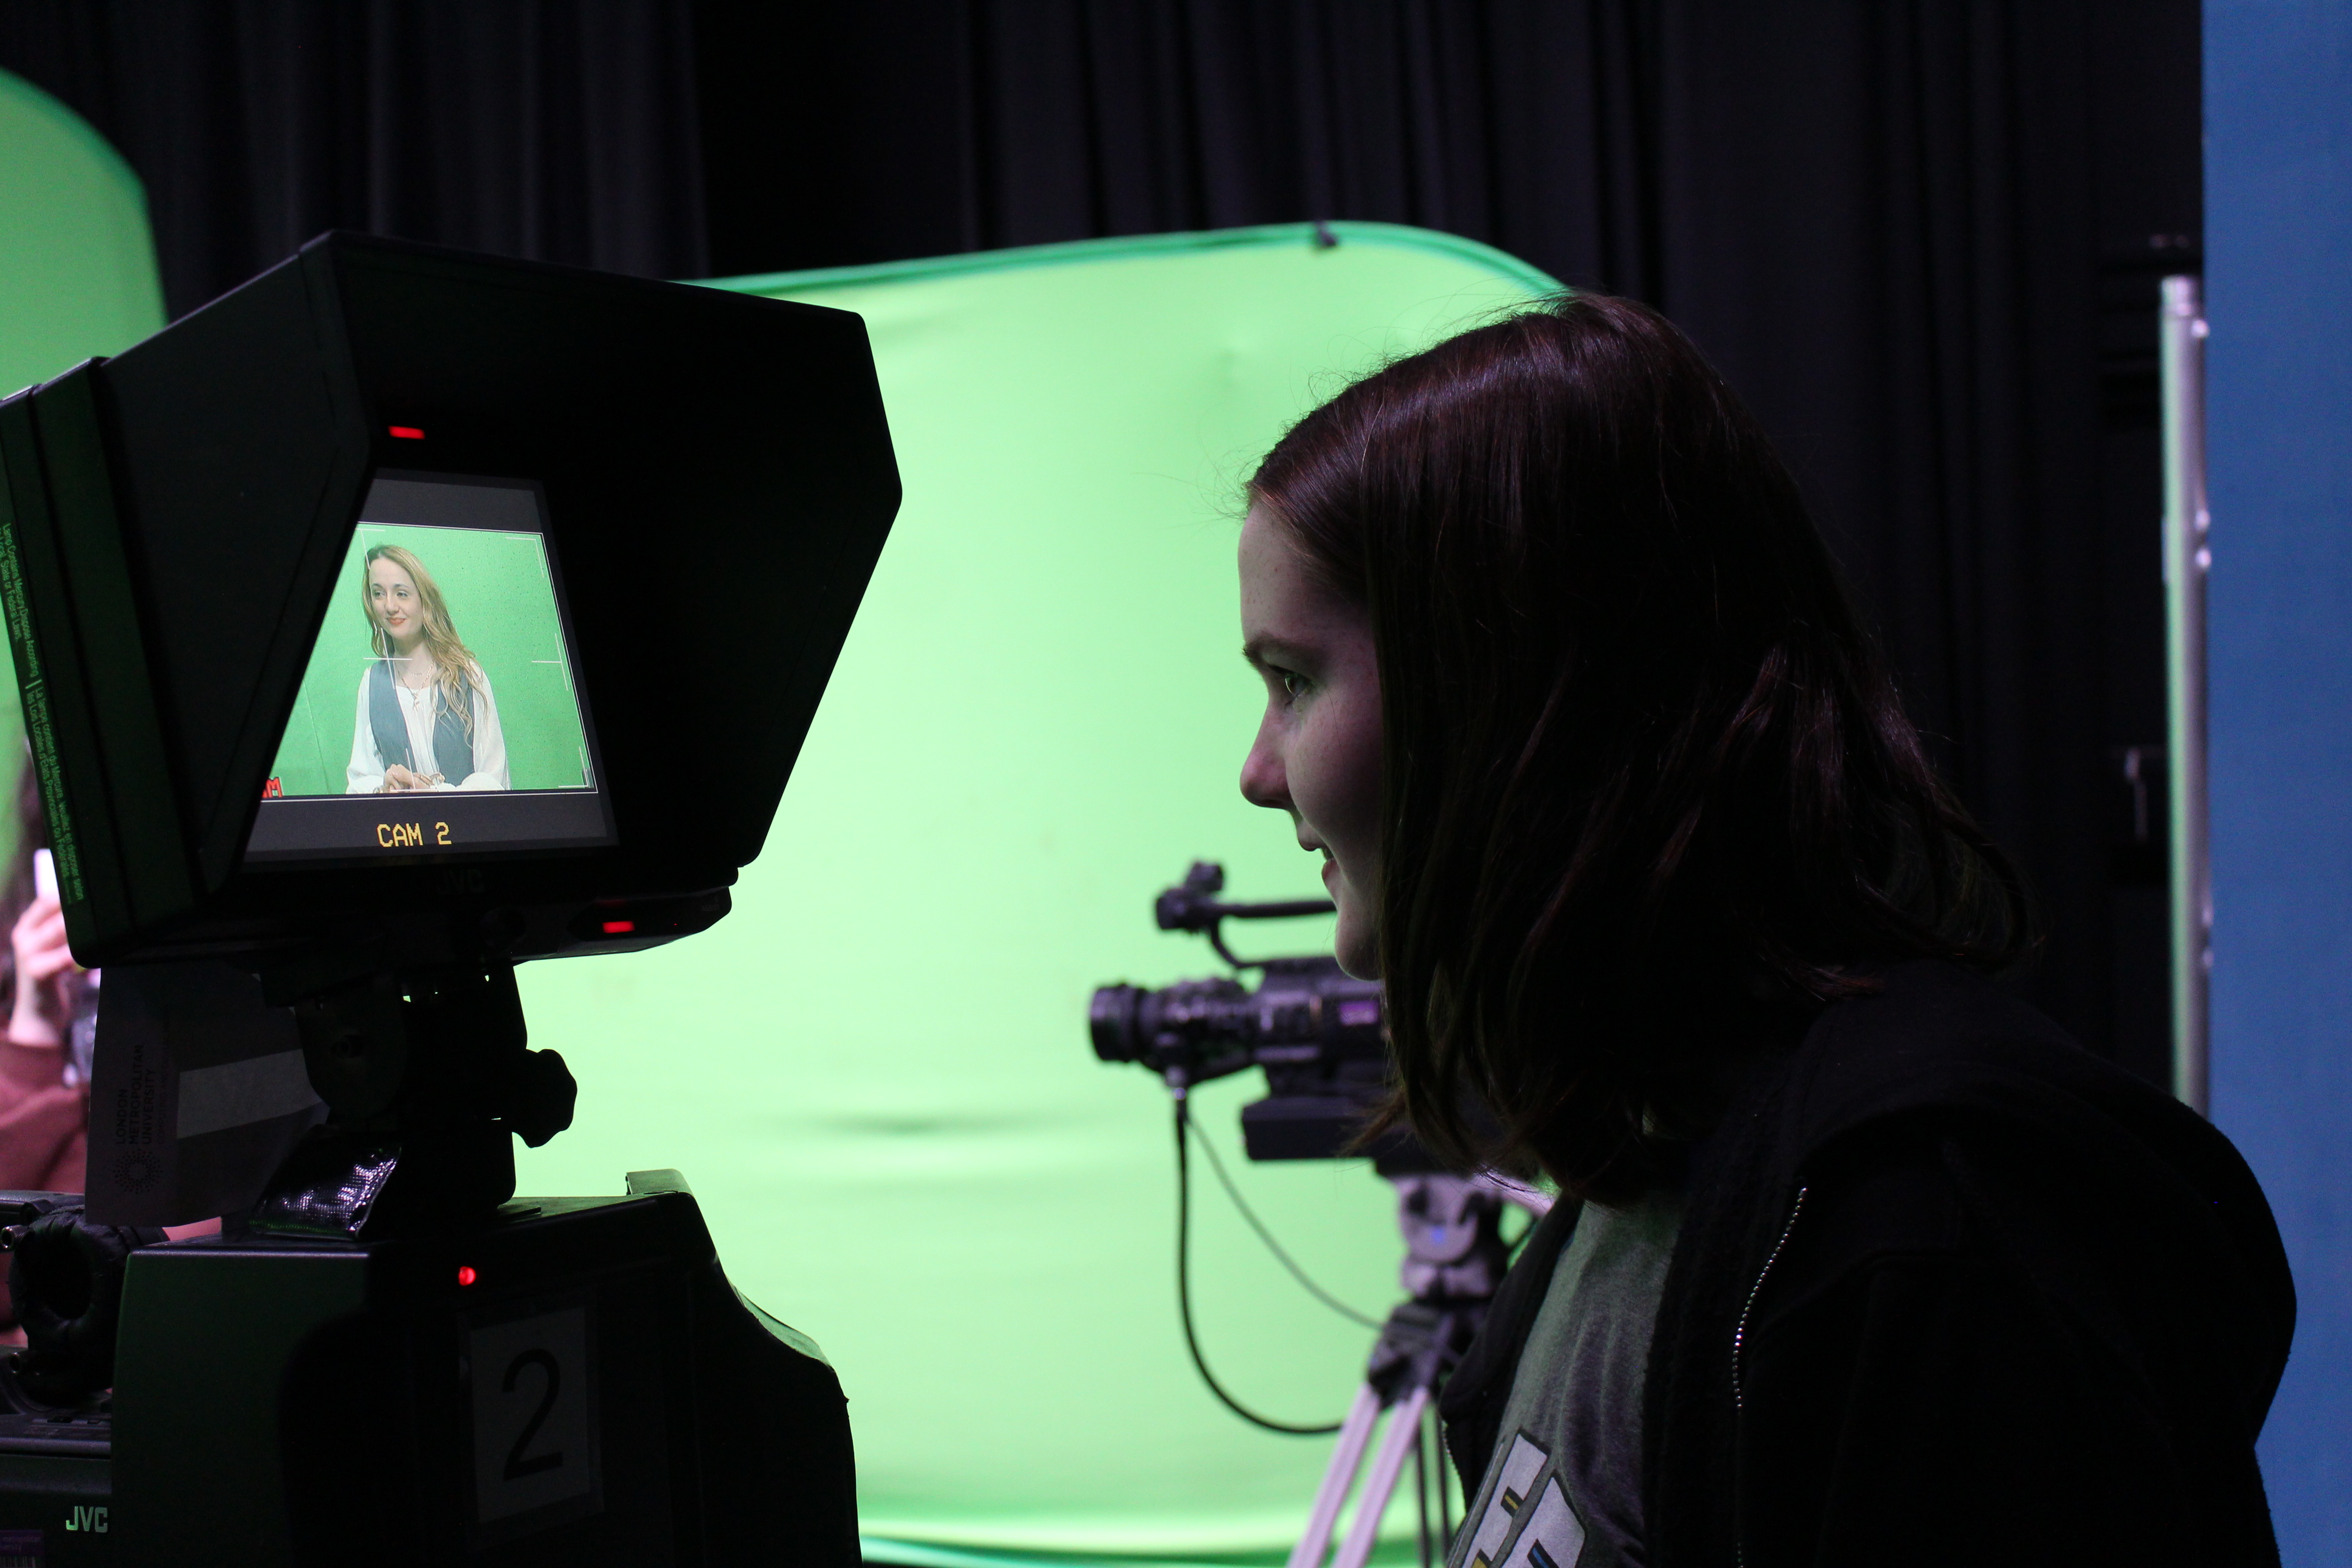 Student in front of a camera and green screen